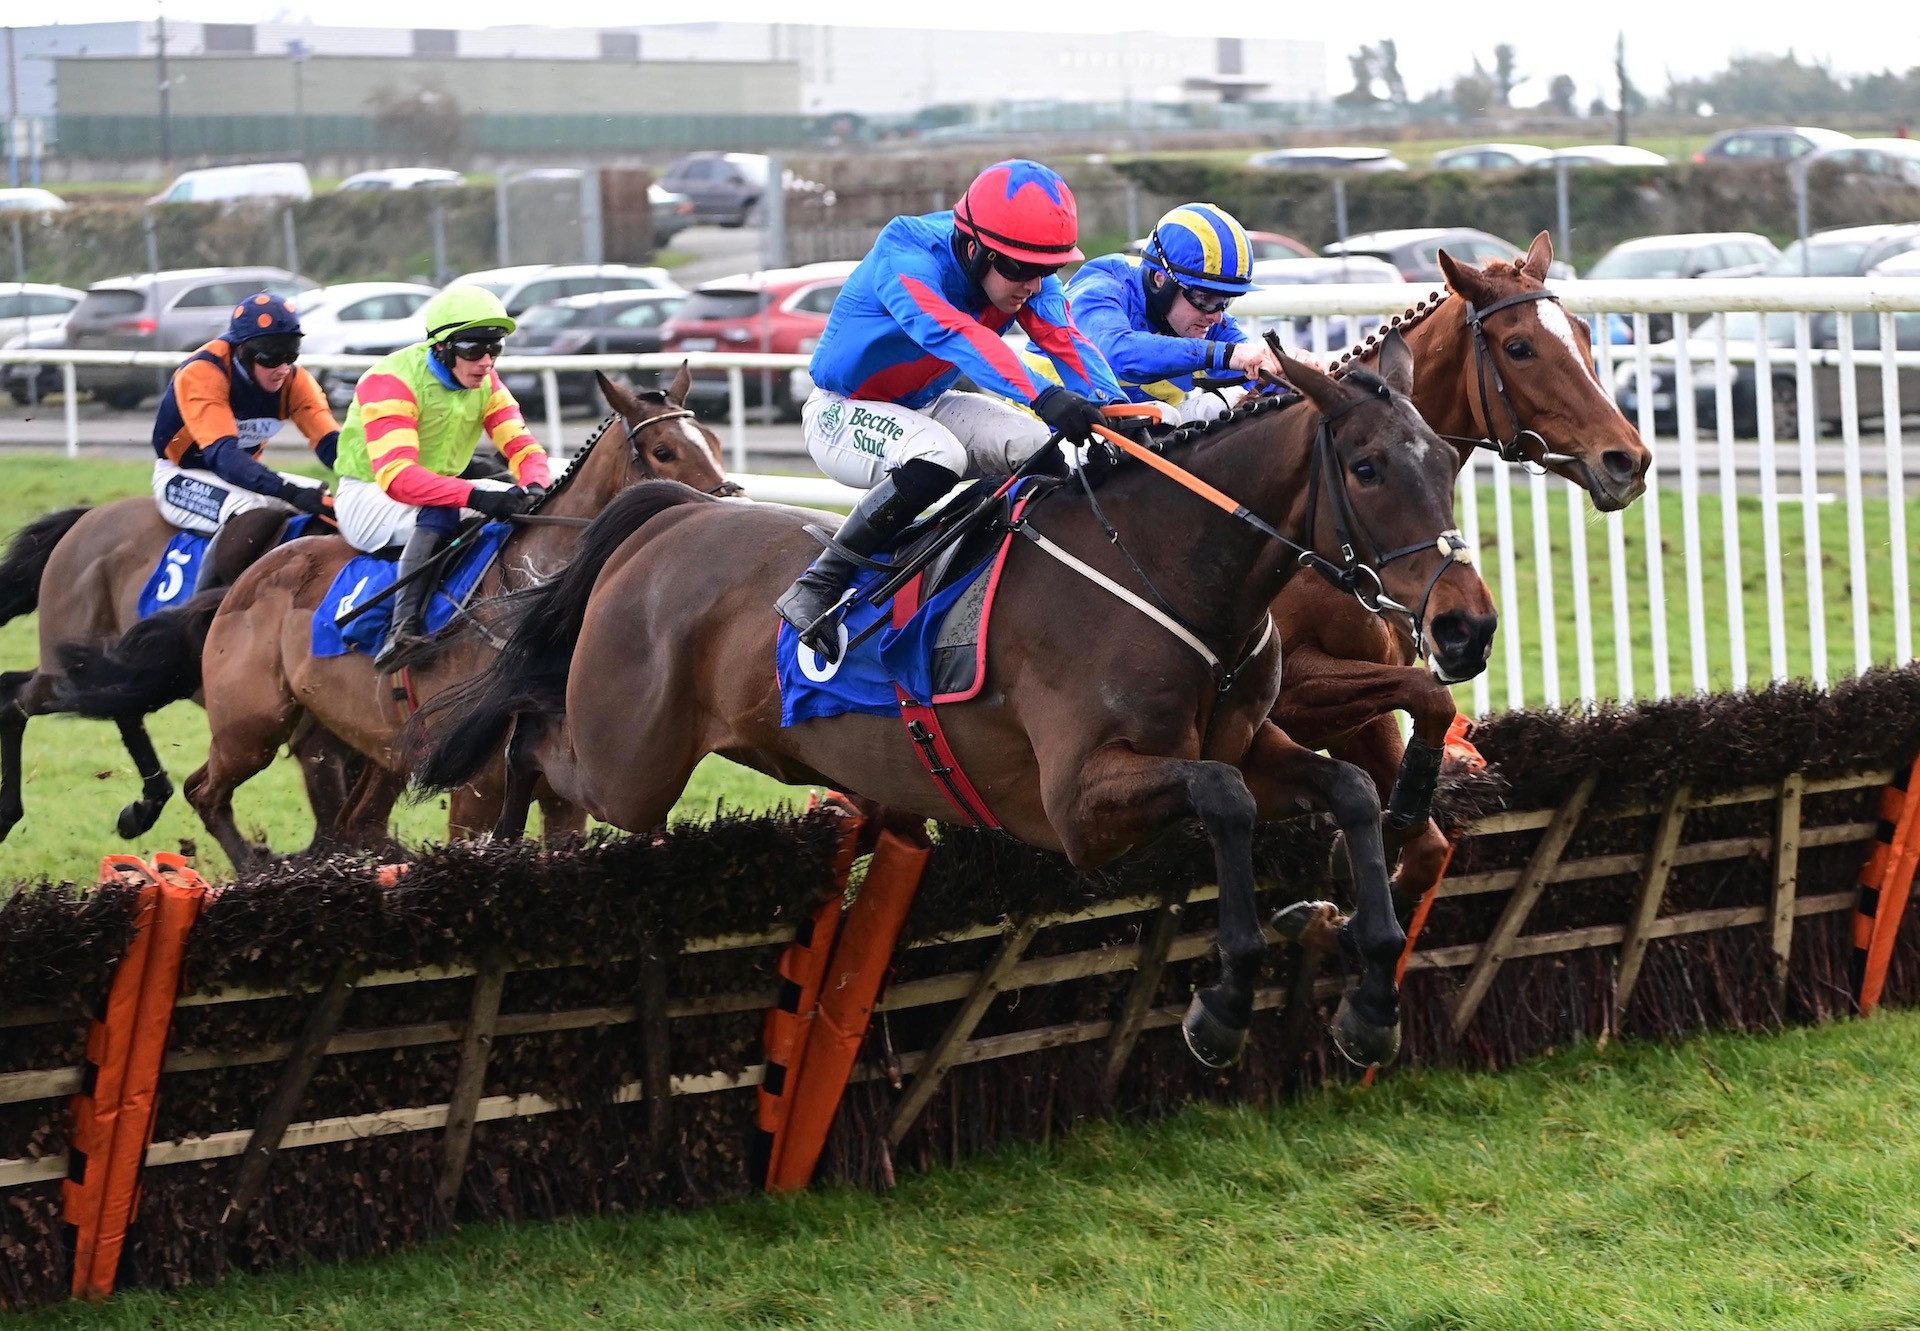 The Goffer (Yeats) Wins The Grade 3 Michael Purcell Memorial Novice Hurdle At Thurles